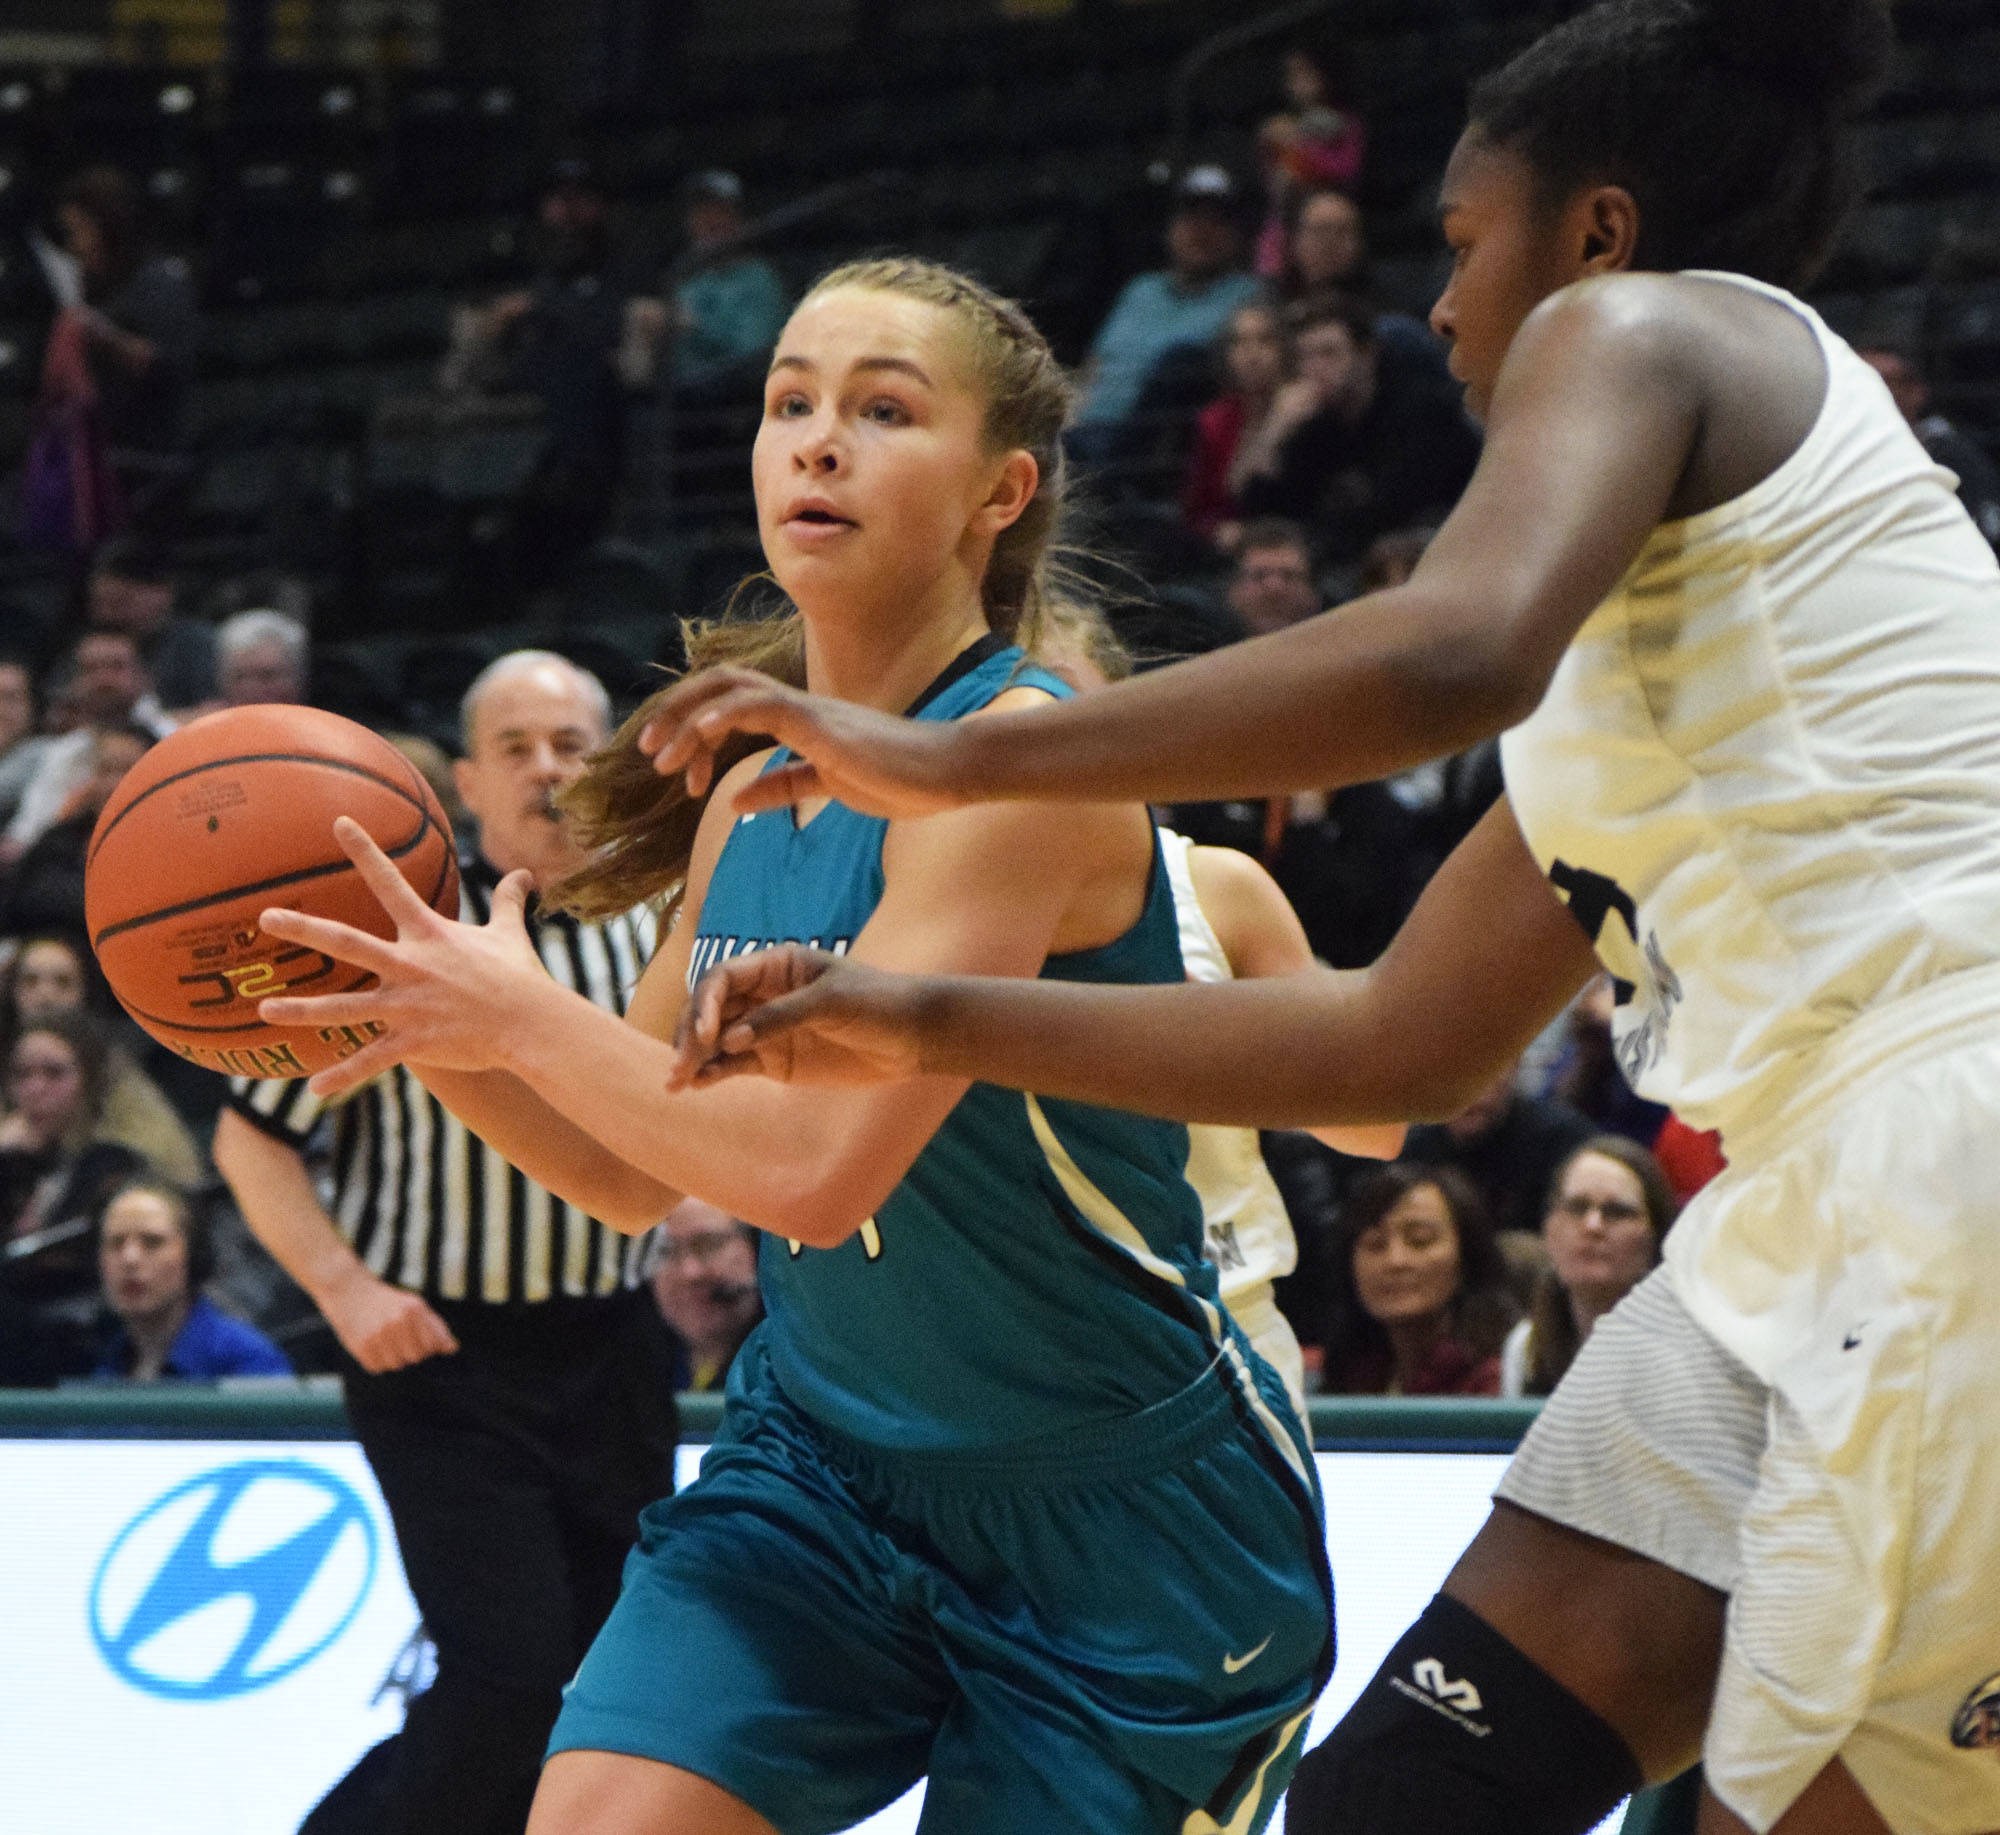 Nikiski’s Kaitlyn Johnson (left) works her way around ACS’s Jordan Todd on Saturday in the Class 3A girls state basketball championship at the Alaska Airlines Center in Anchorage. (Photo by Joey Klecka/Peninsula Clarion)